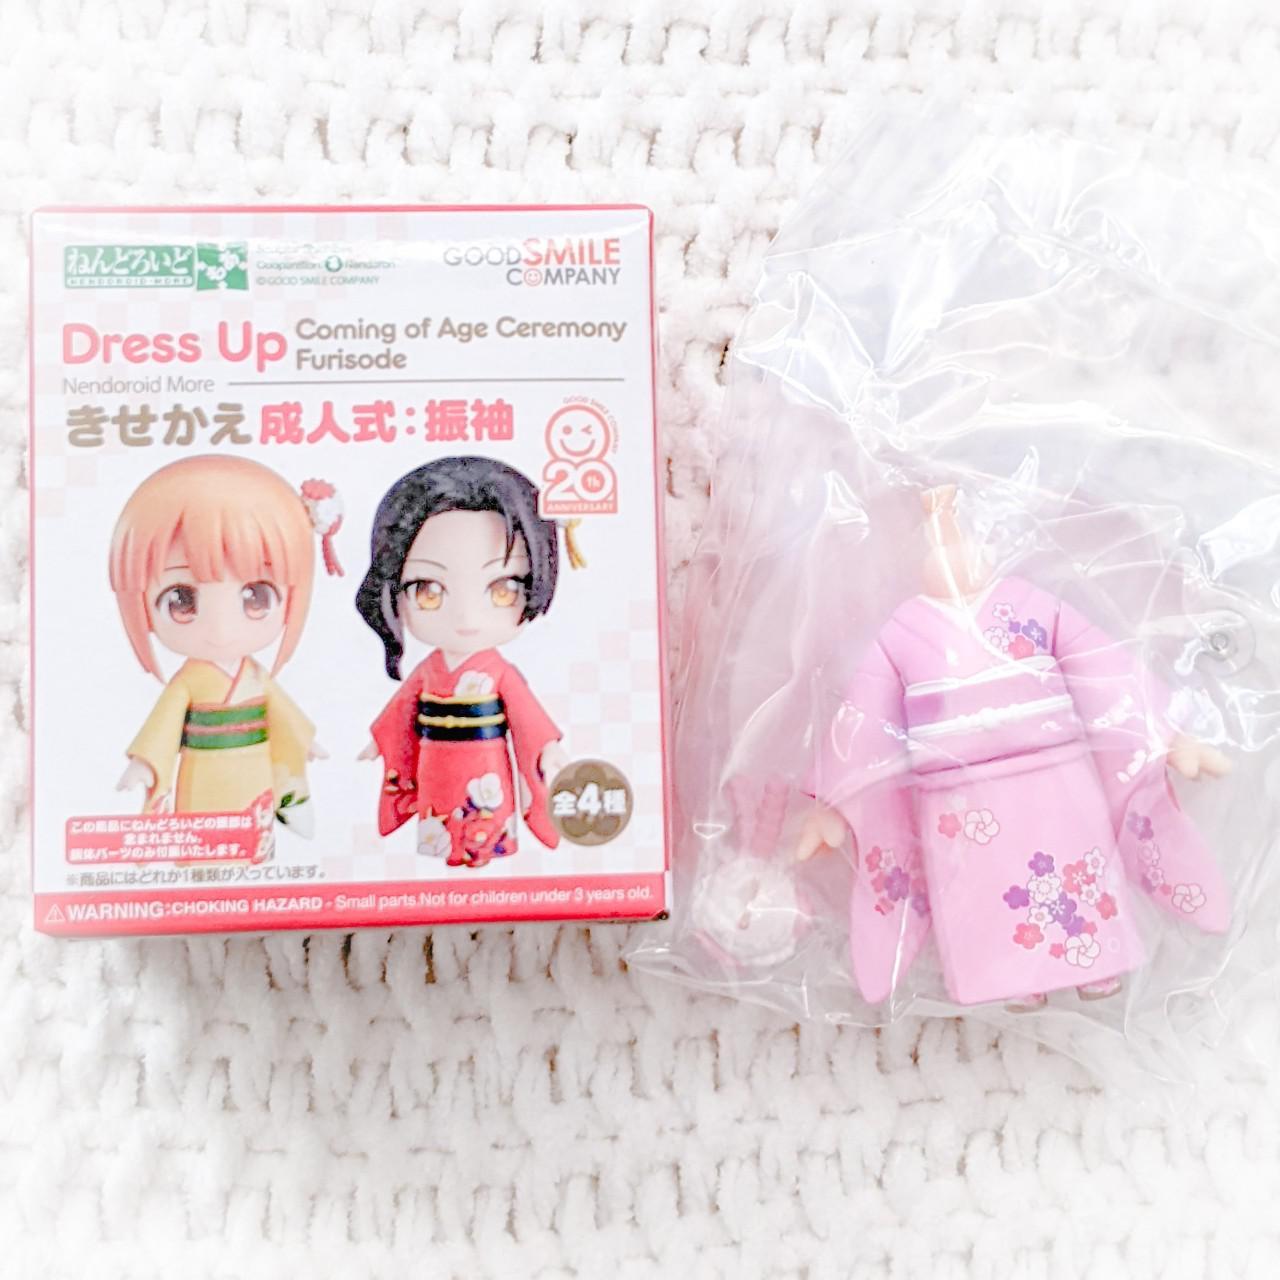 Nendoroid More Dress Up Outfit - Coming of Age Ceremony Kimono Furisode (PINK)